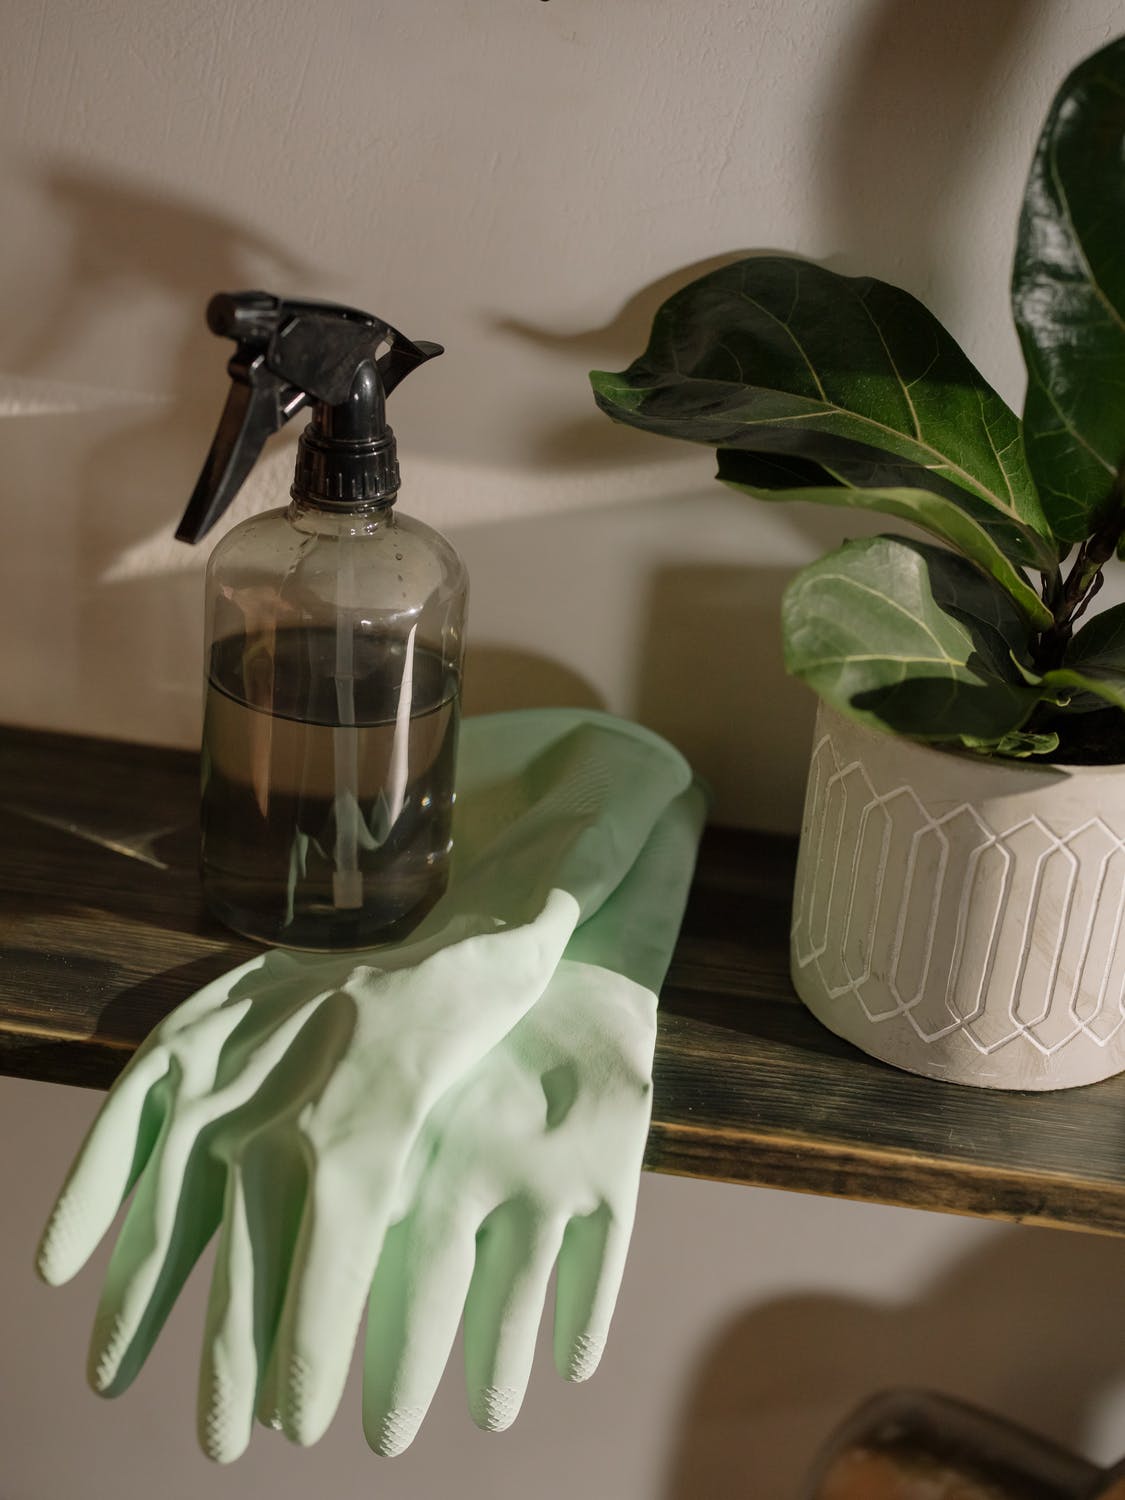 5 Easy Eco-Friendly Tips For Cleaning Your Home